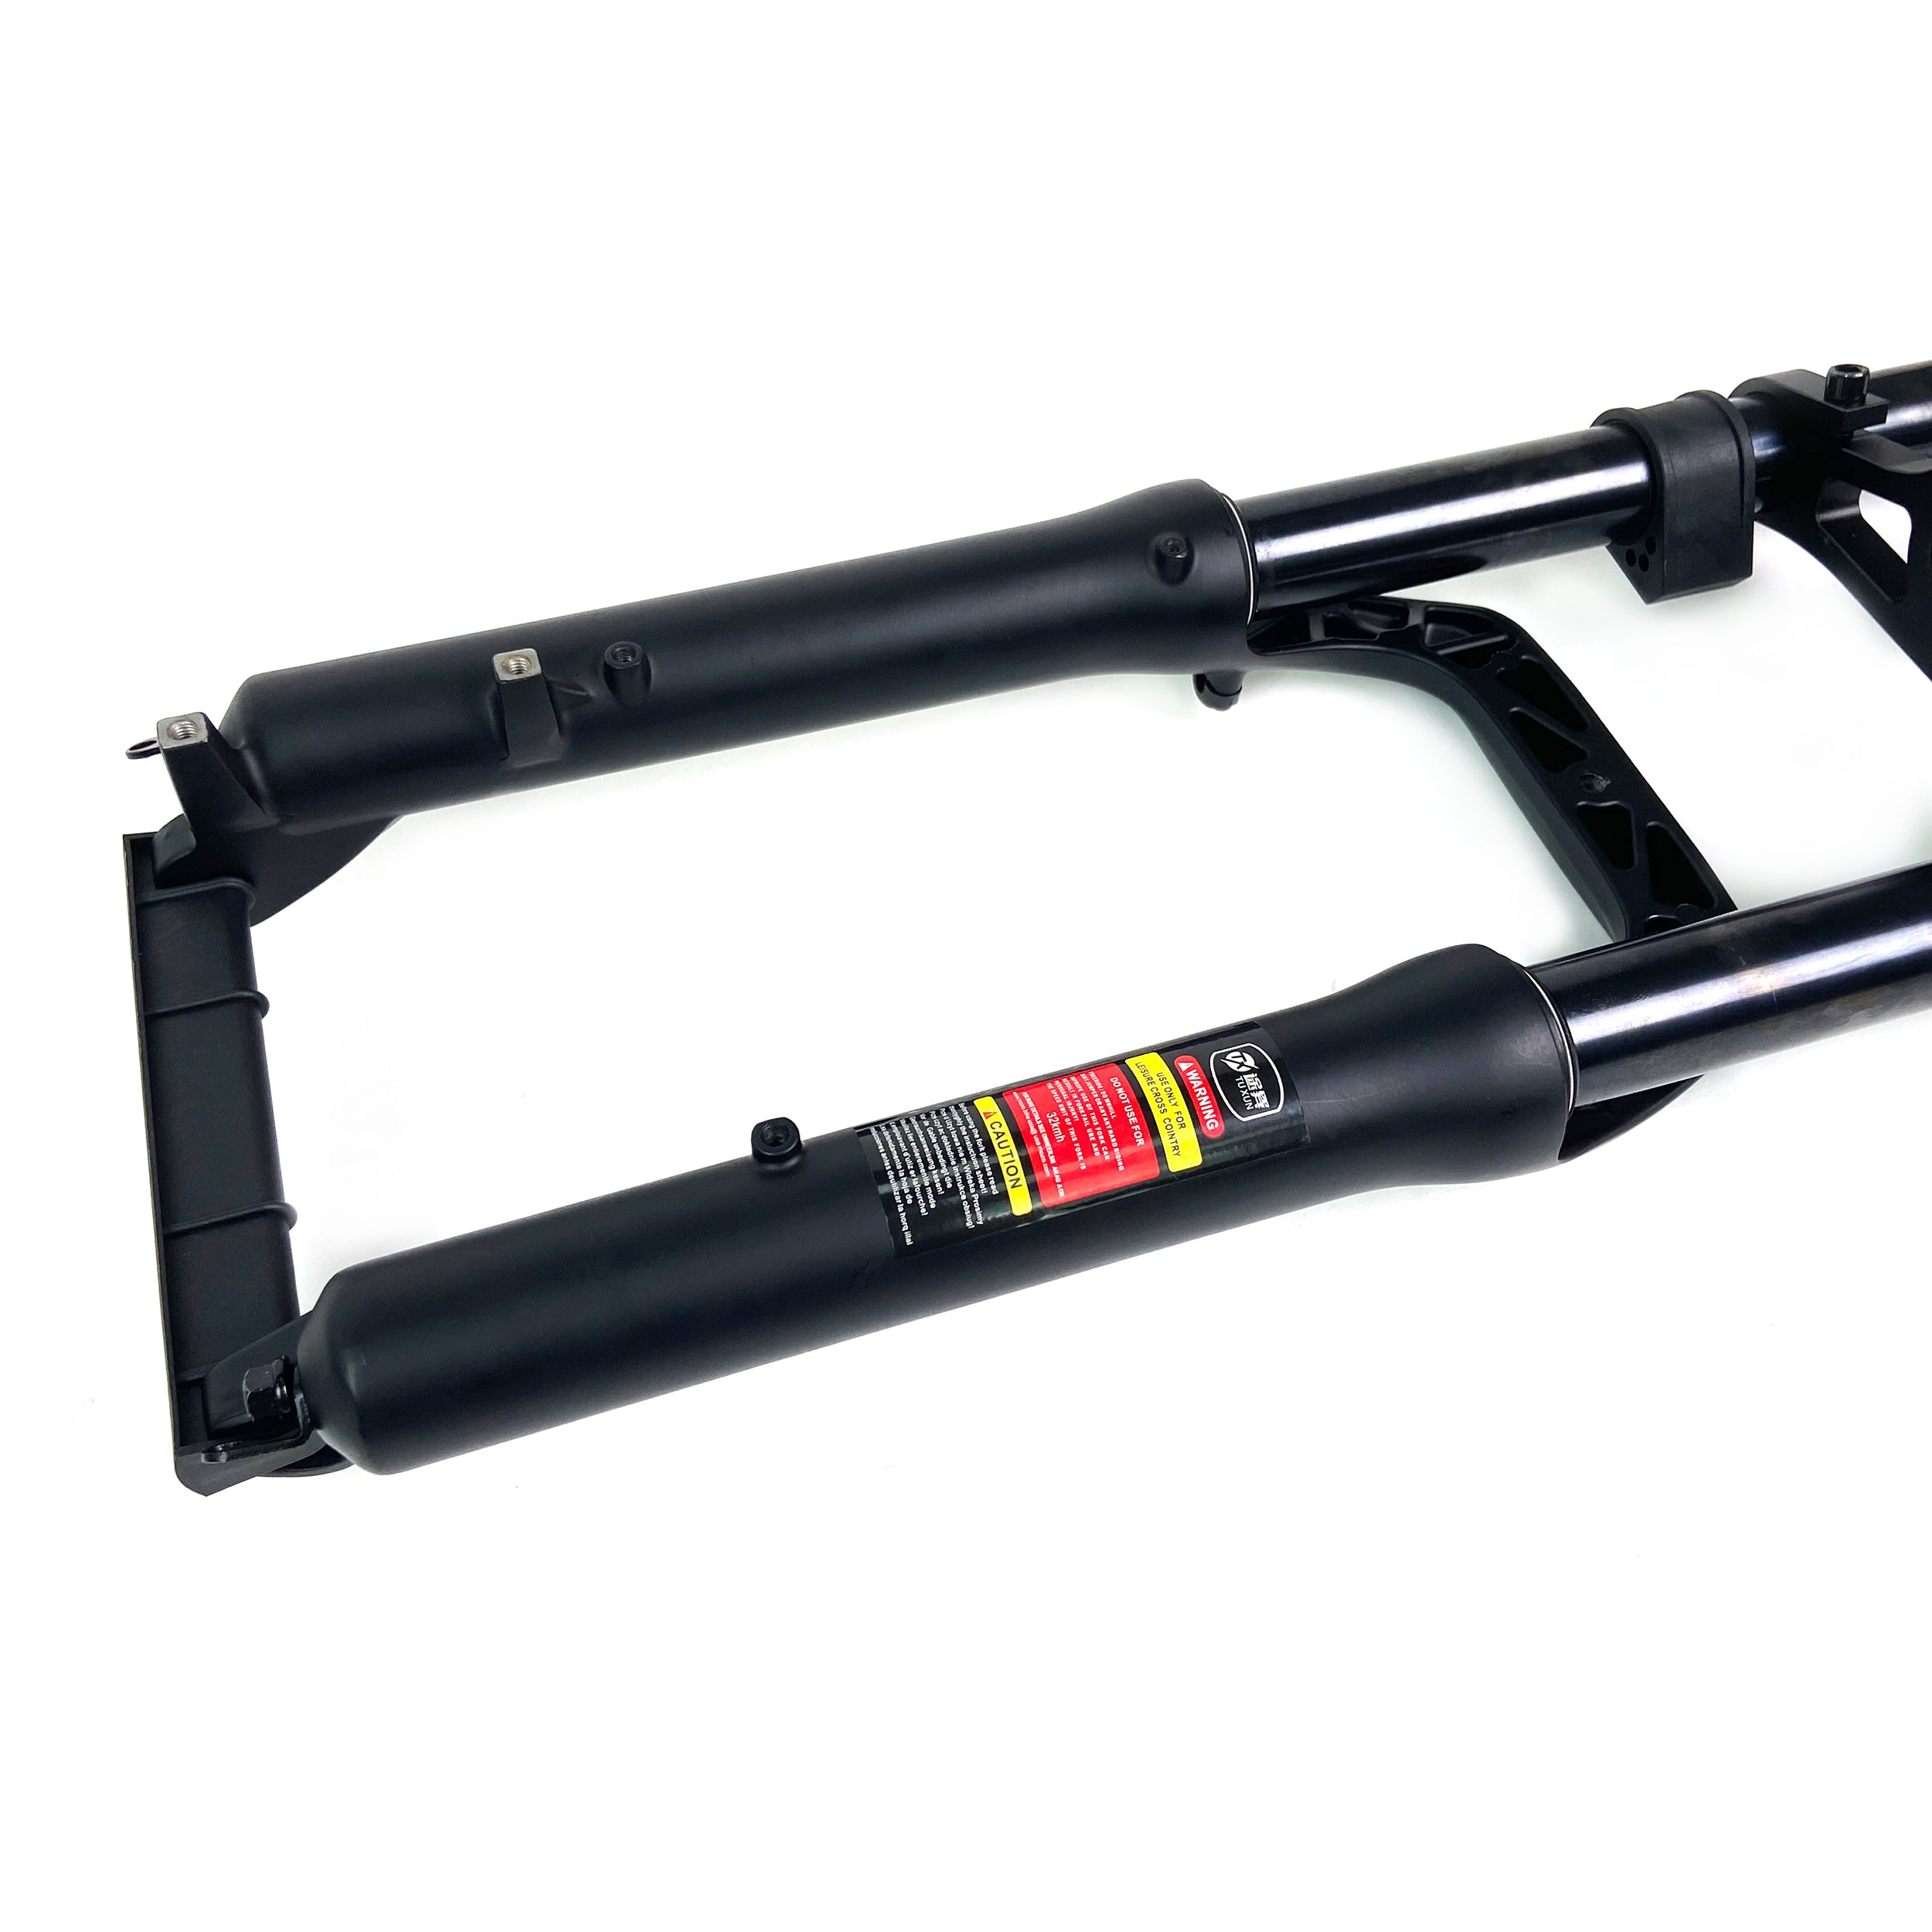 FRONT FORK FOR COSWHEEL EBIKE